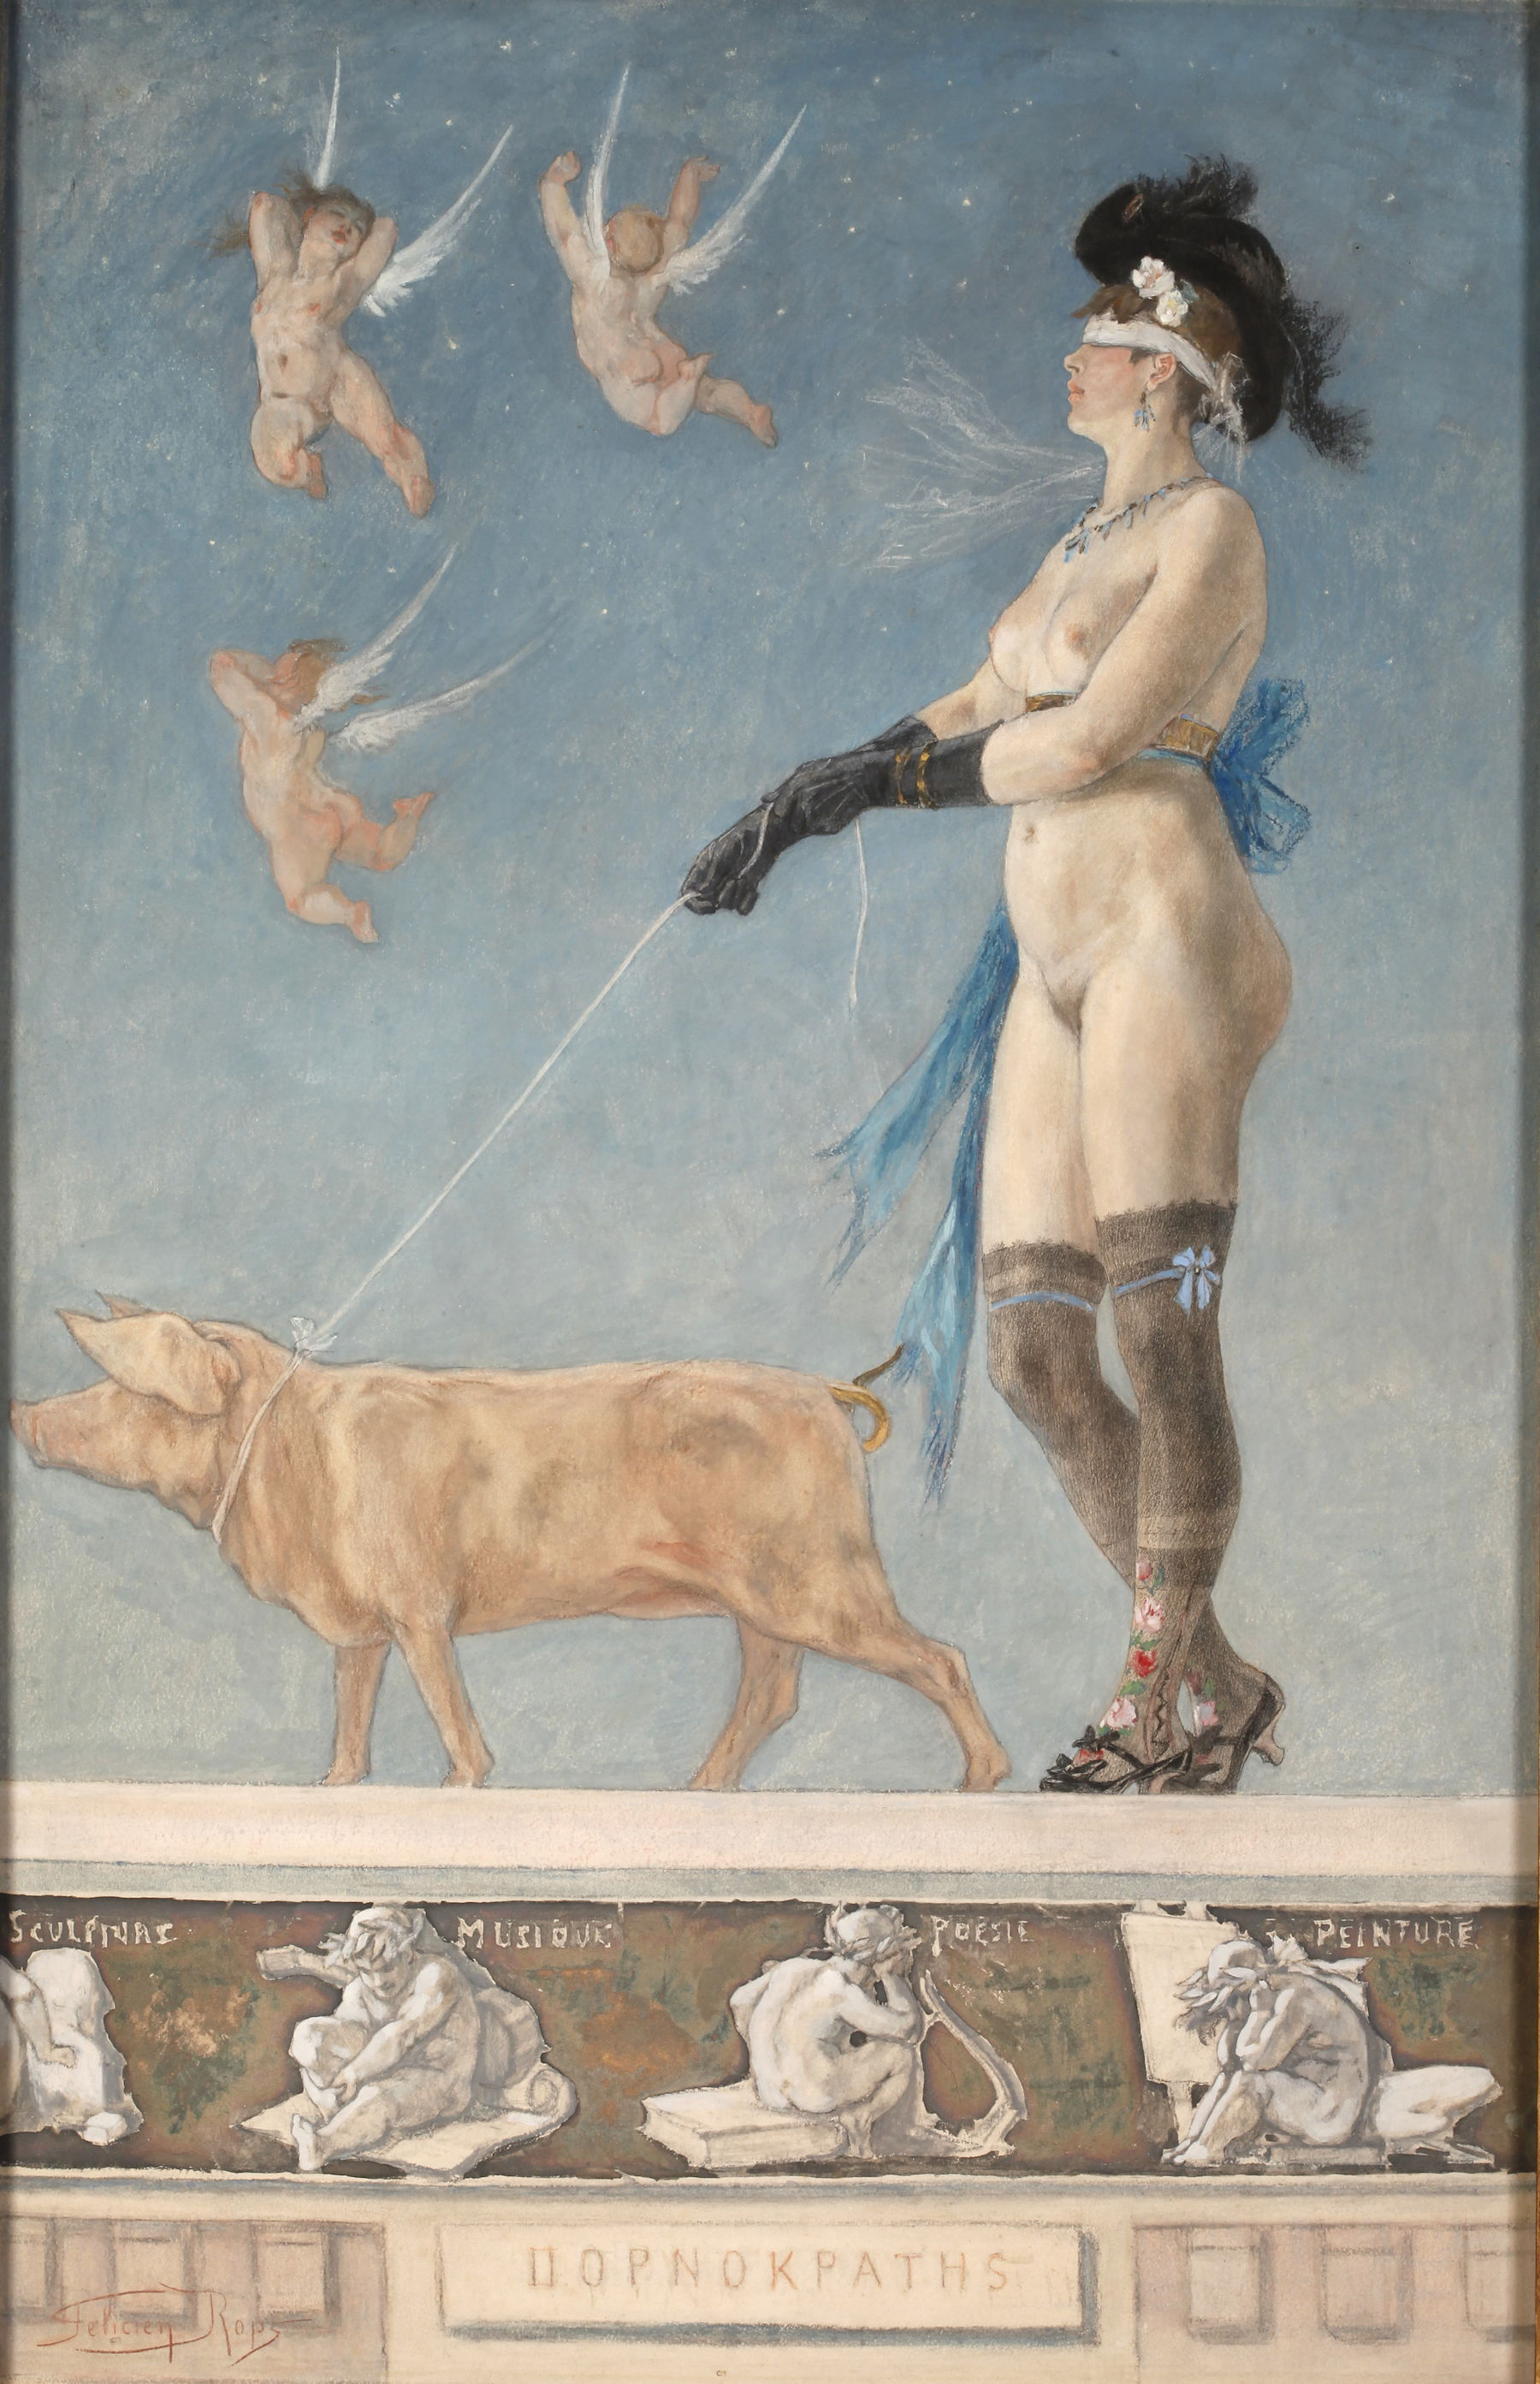 Pornokrates (or The Lady with the Pig) by Félicien Rops - 1878 - 70 x 45 cm Europeana